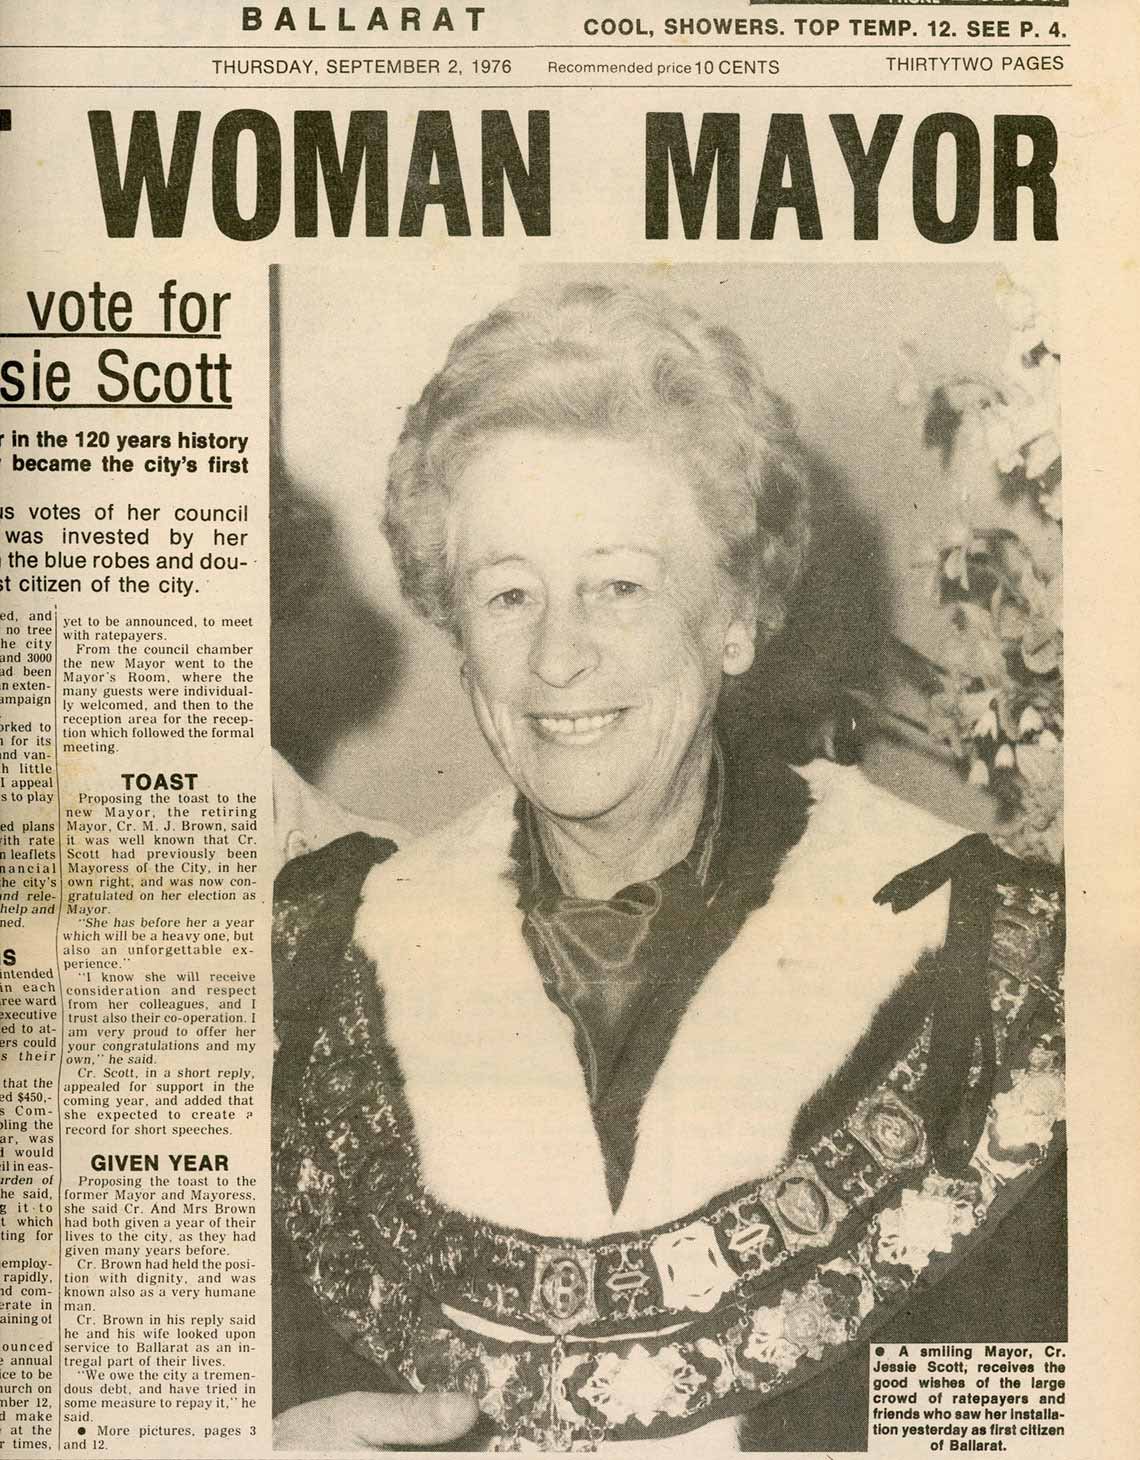 Newspaper clipping with title Women Mayor, showing photo of Mayor Jessie Scott in mayoral robes